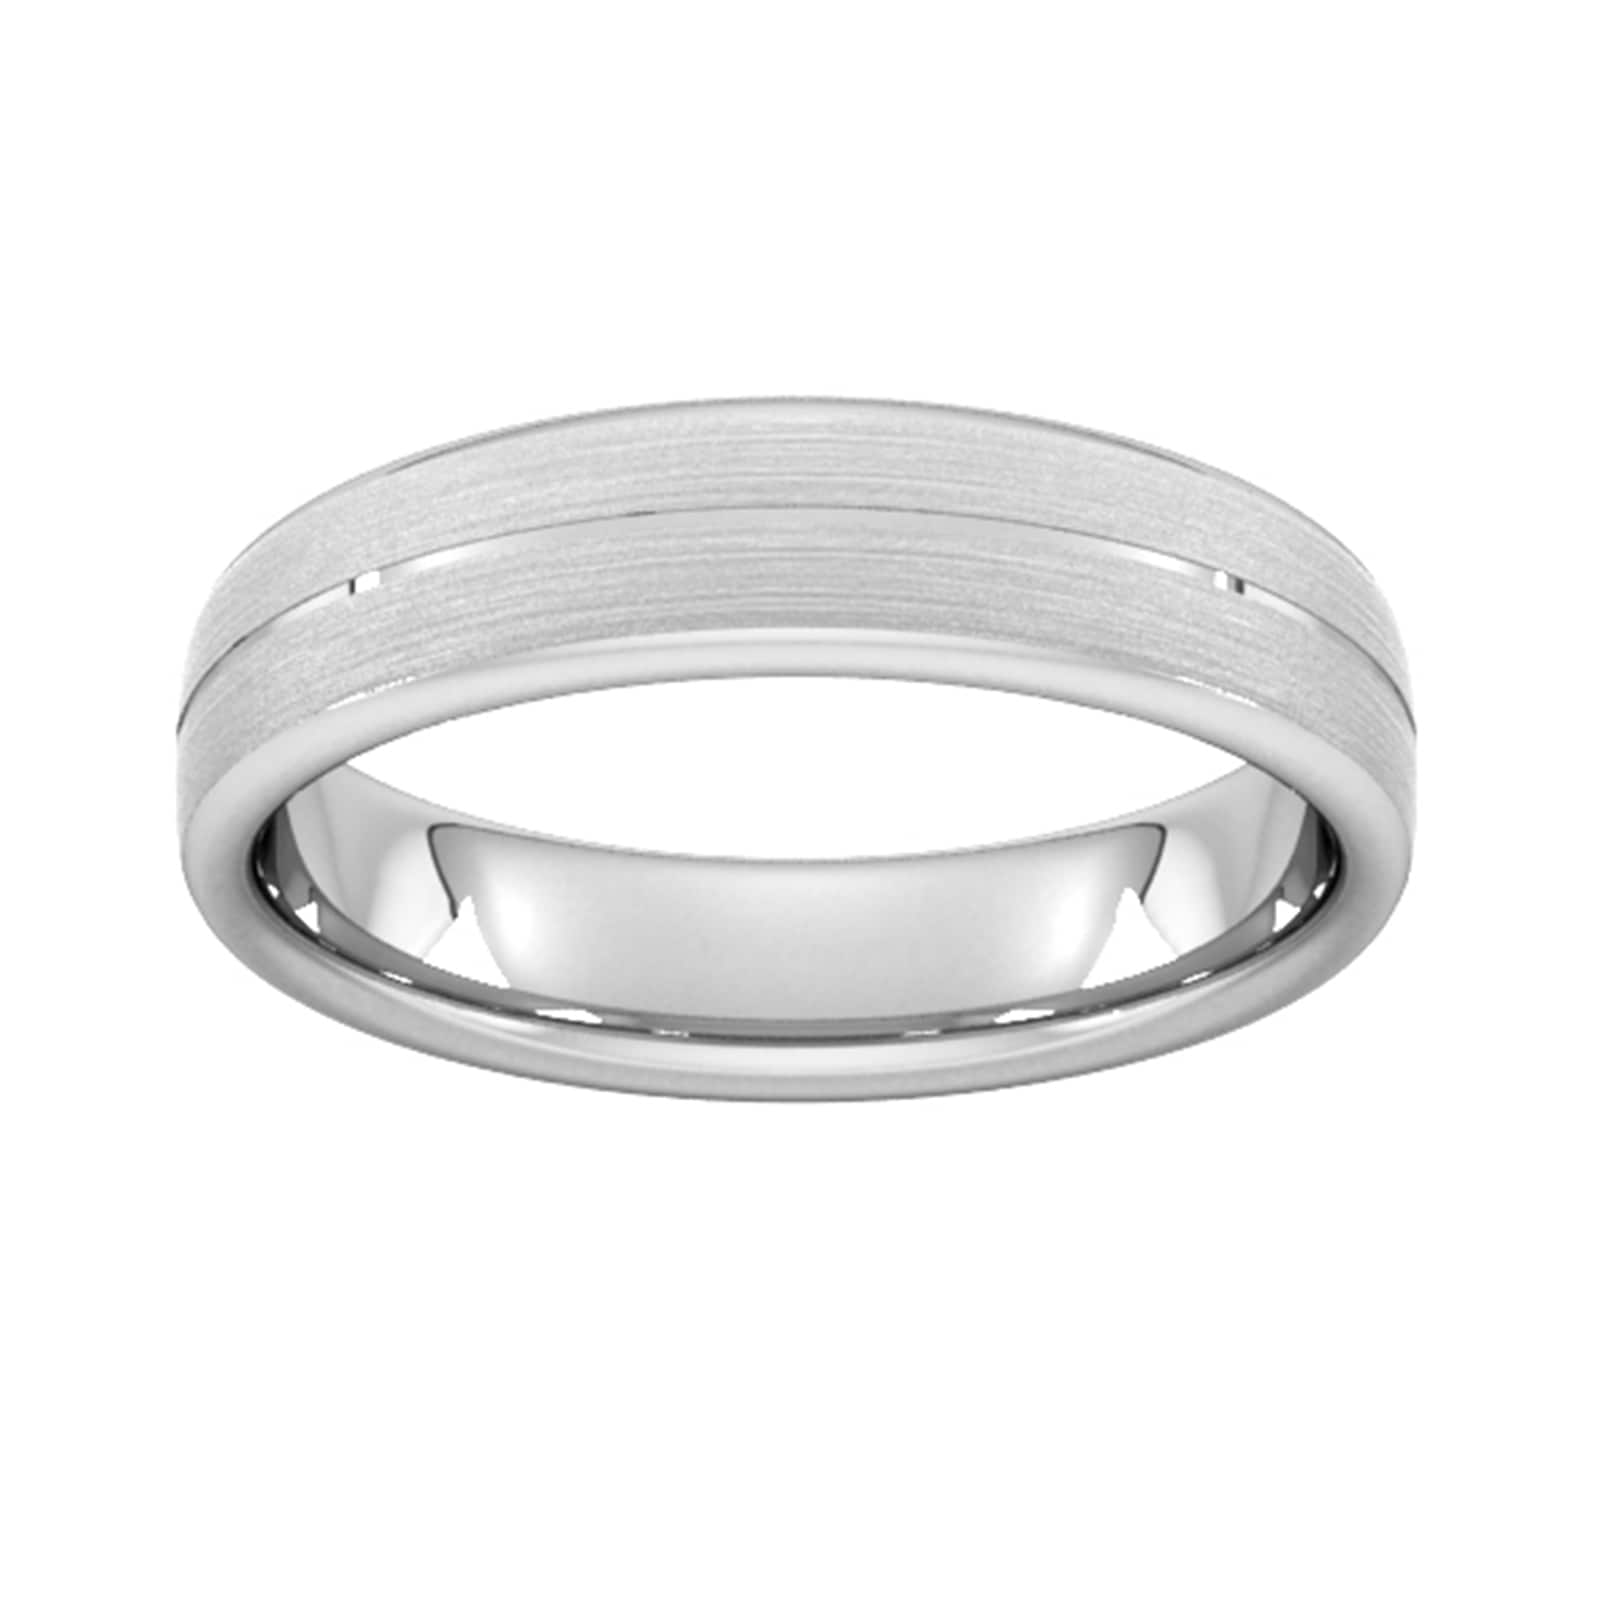 5mm Flat Court Heavy Centre Groove With Chamfered Edge Wedding Ring In 18 Carat White Gold - Ring Size R